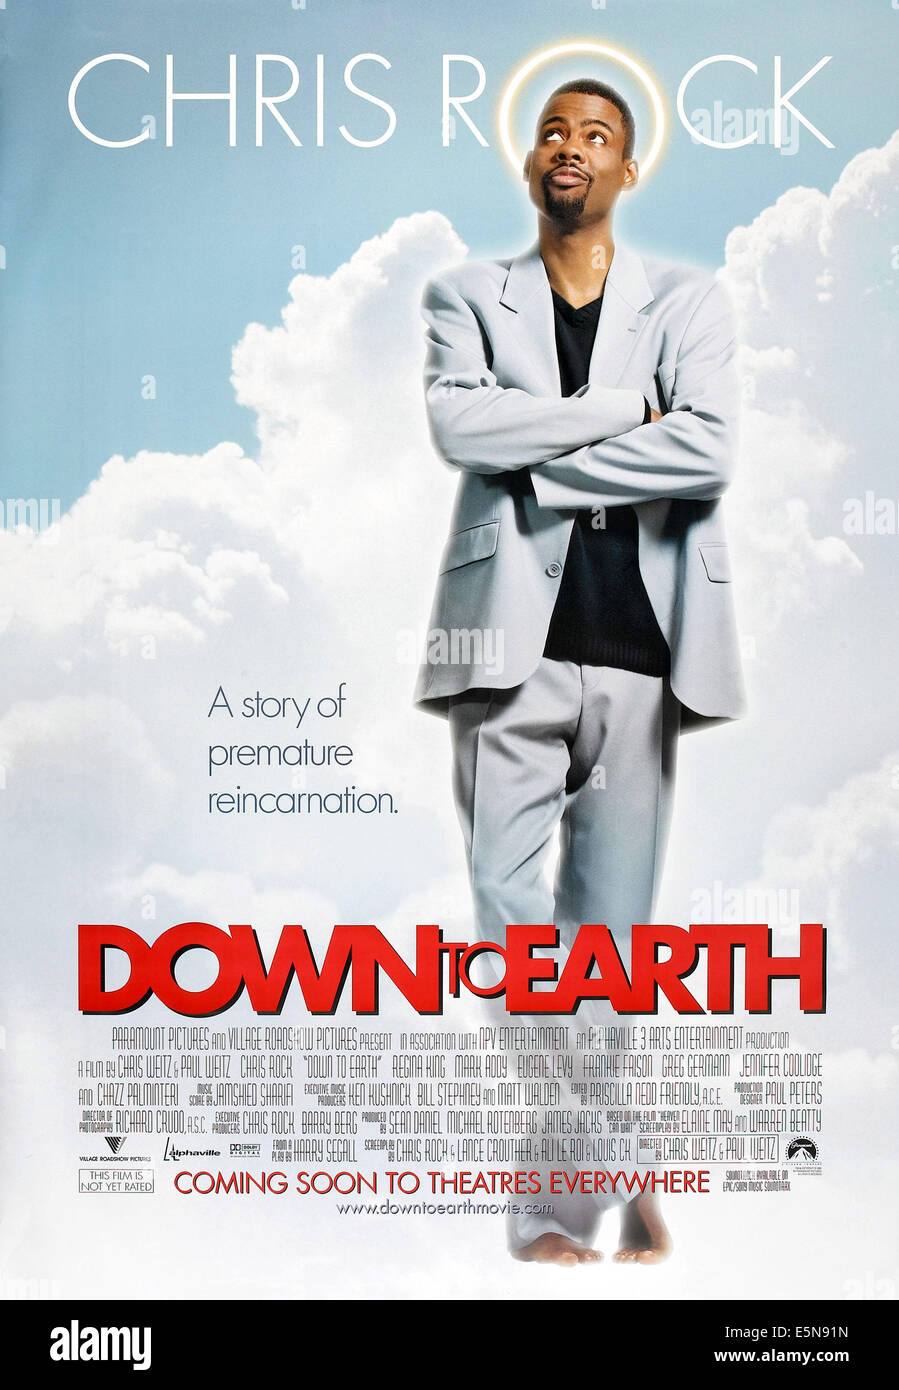 DOWN TO EARTH, US advance poster art, Chris Rock, 2001, ©Paramount Pictures/courtesy Everett Collection Stock Photo